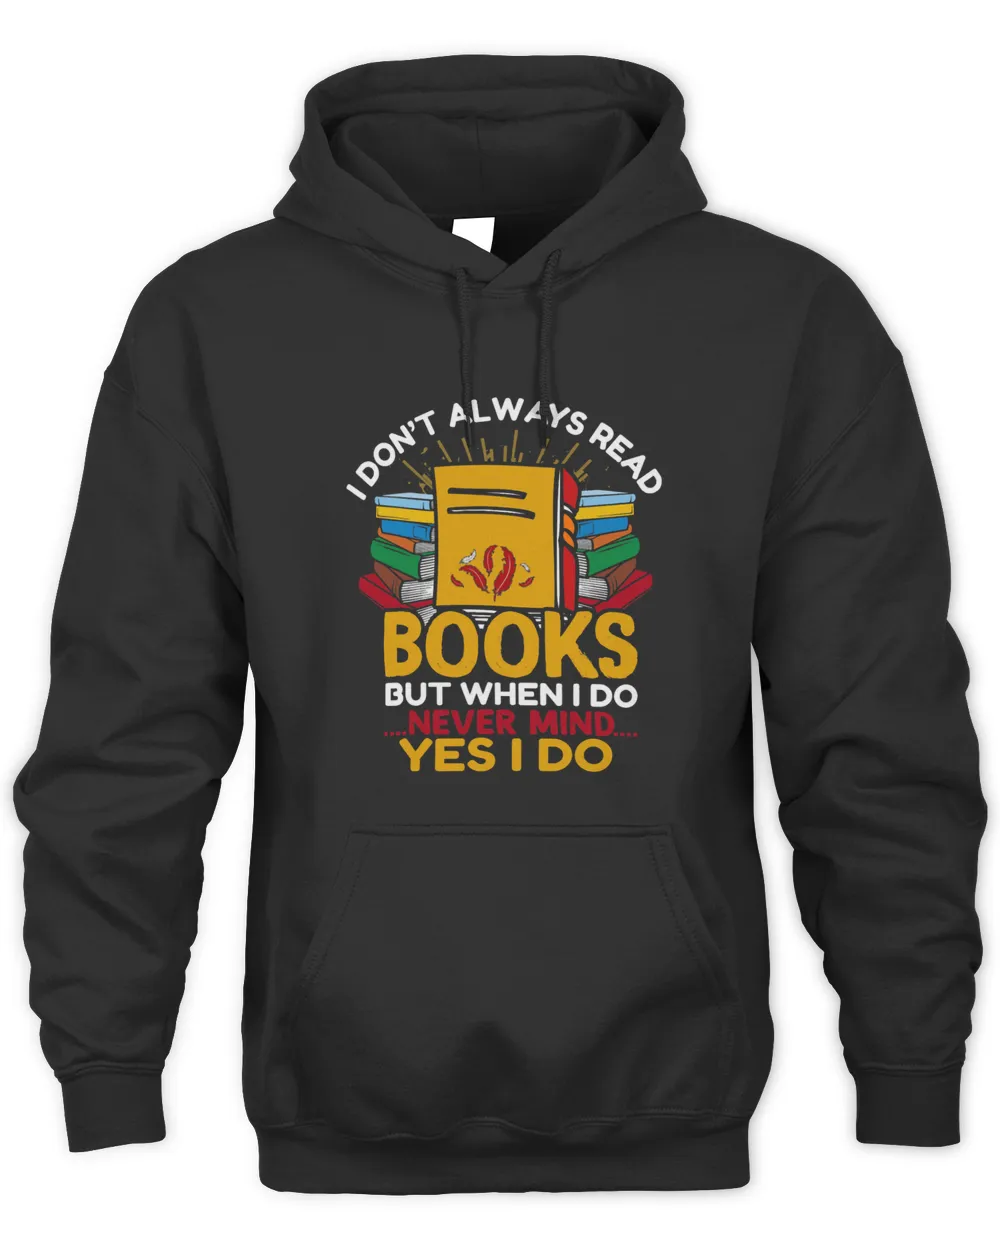 Reading adventure book readers apparel funny quote